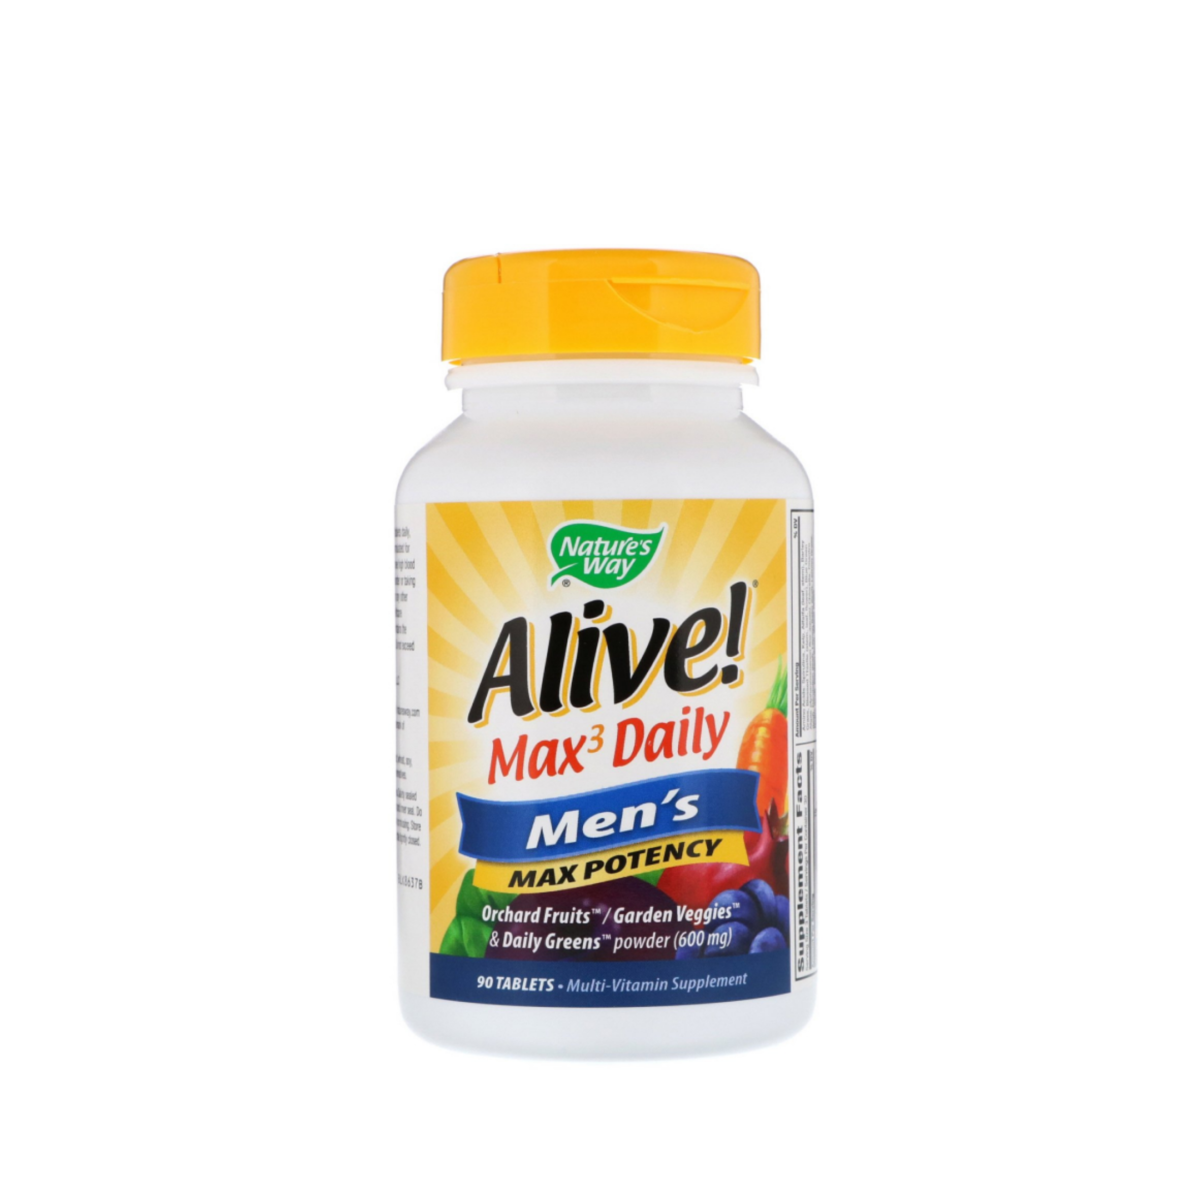 Nature’s Way Alive!® Max3 Daily Men’s Max Potency Multivitamin 90 Tablets